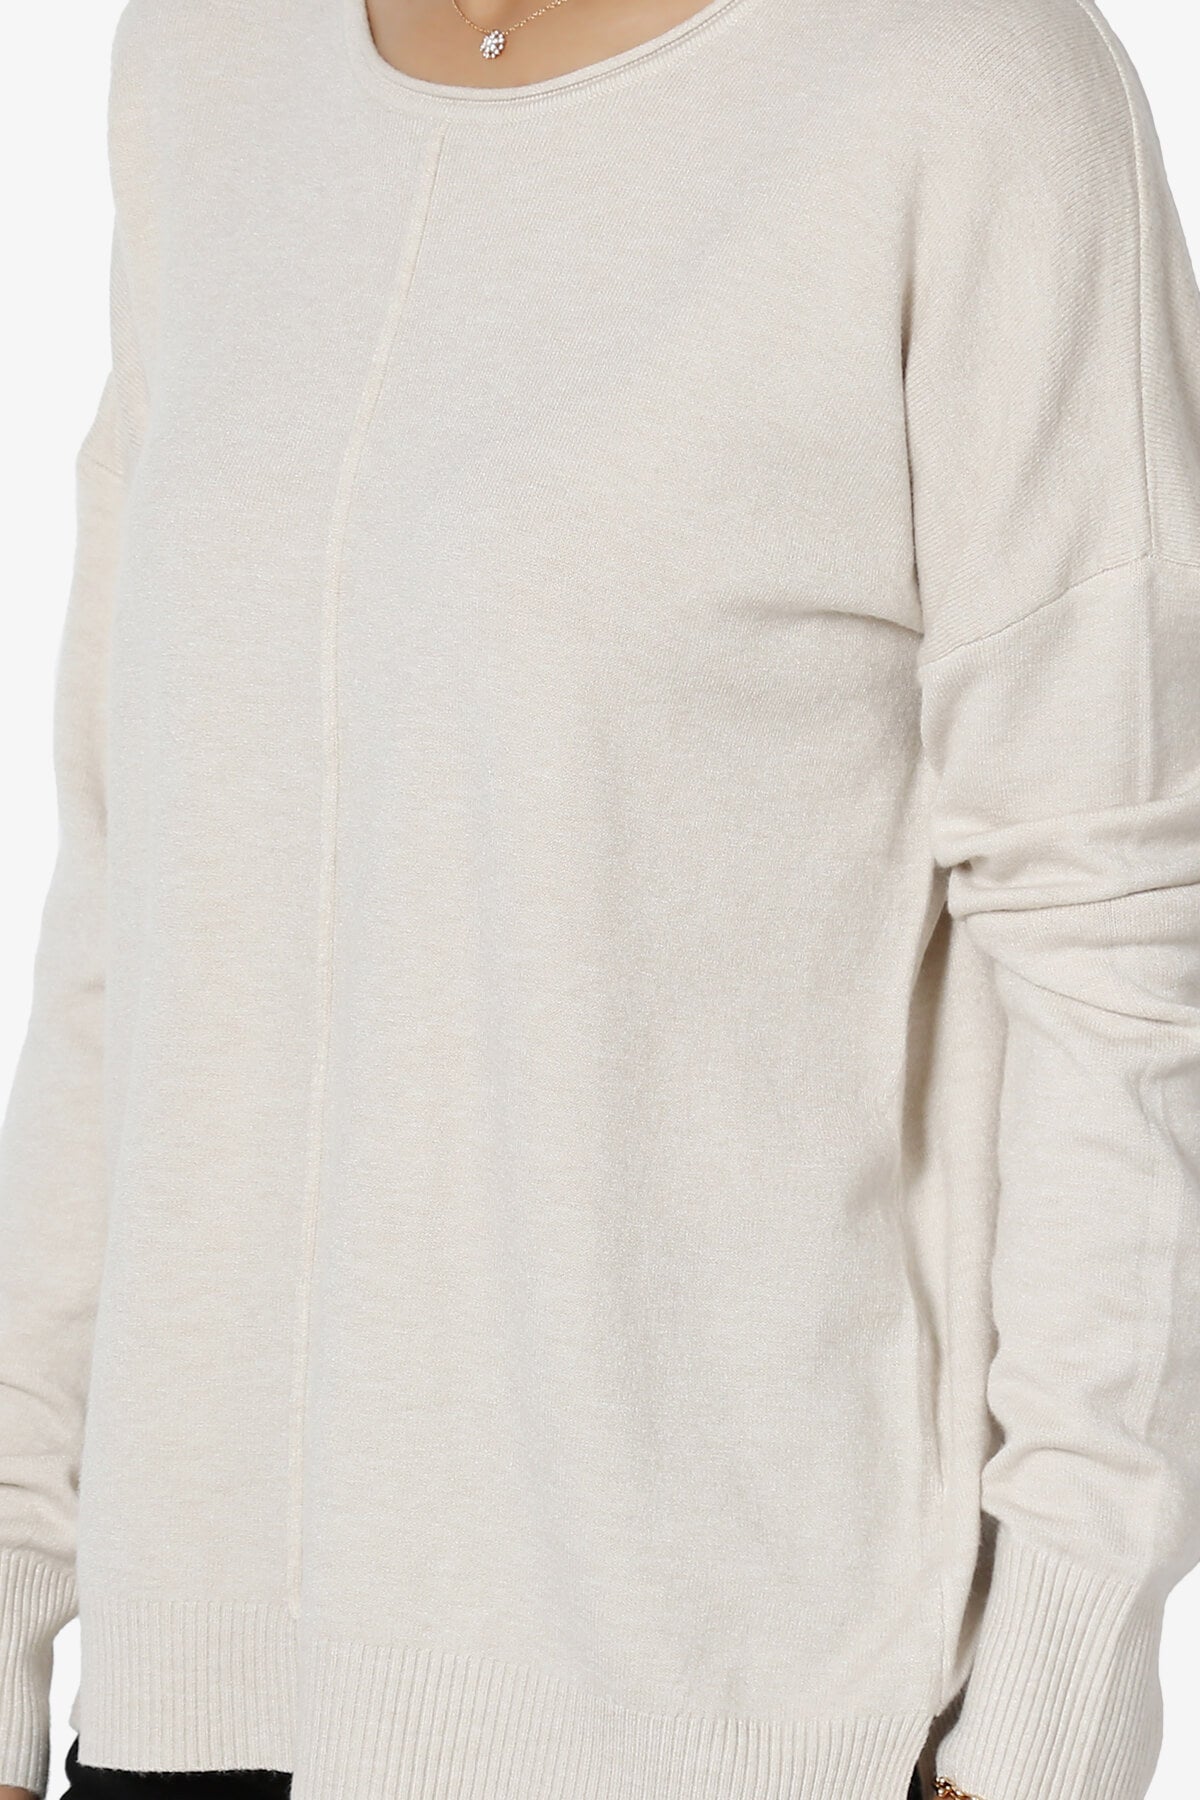 Carolina Long Sleeve Relaxed Fit Knit Top SAND BEIGE_5